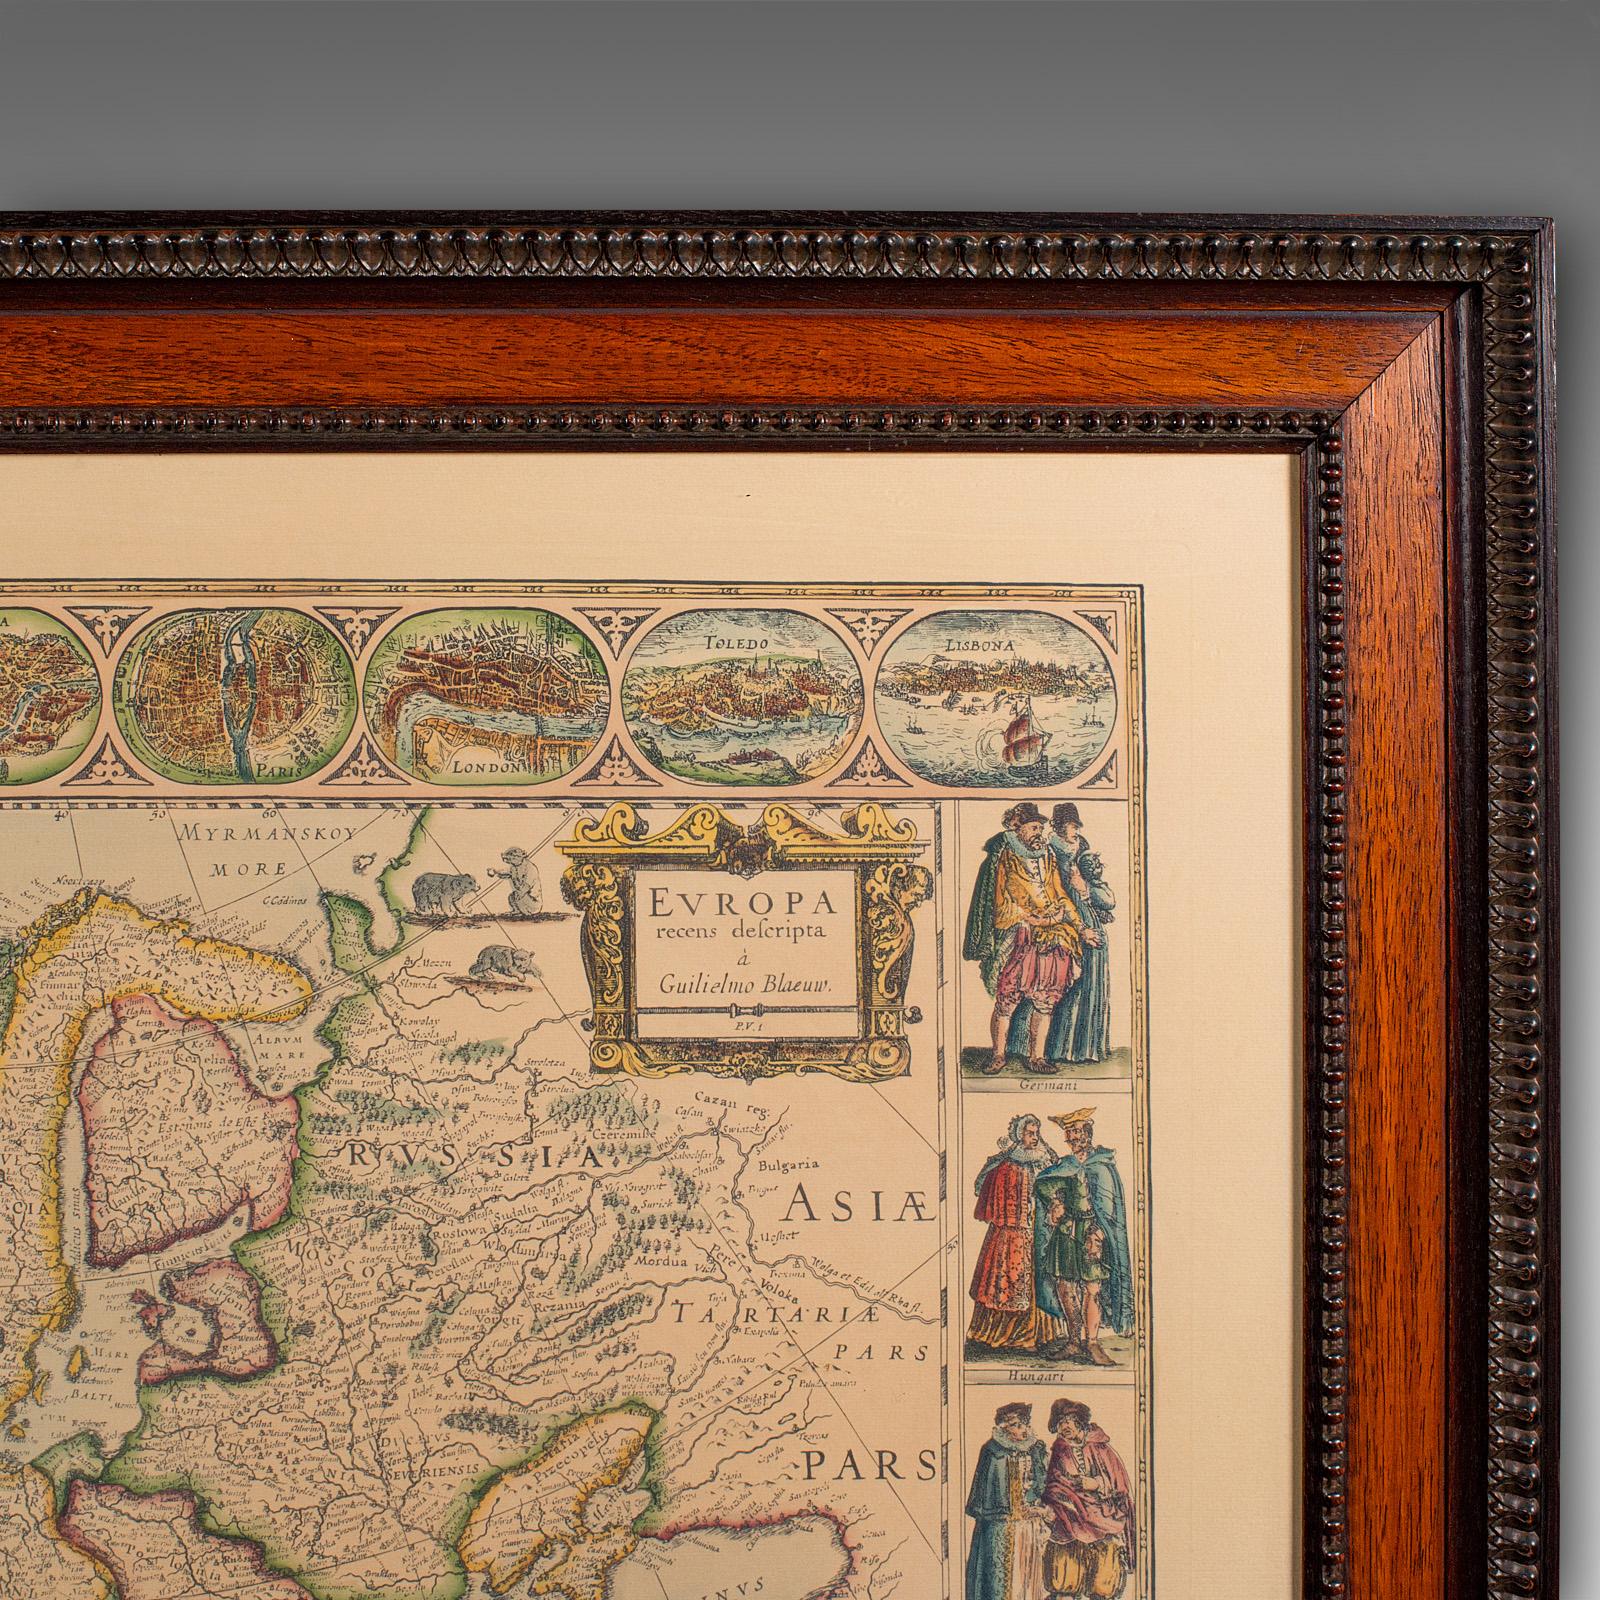 Vintage Reproduction 17th Century Map of Europe, American, Cartography, Blaeuw In Good Condition For Sale In Hele, Devon, GB